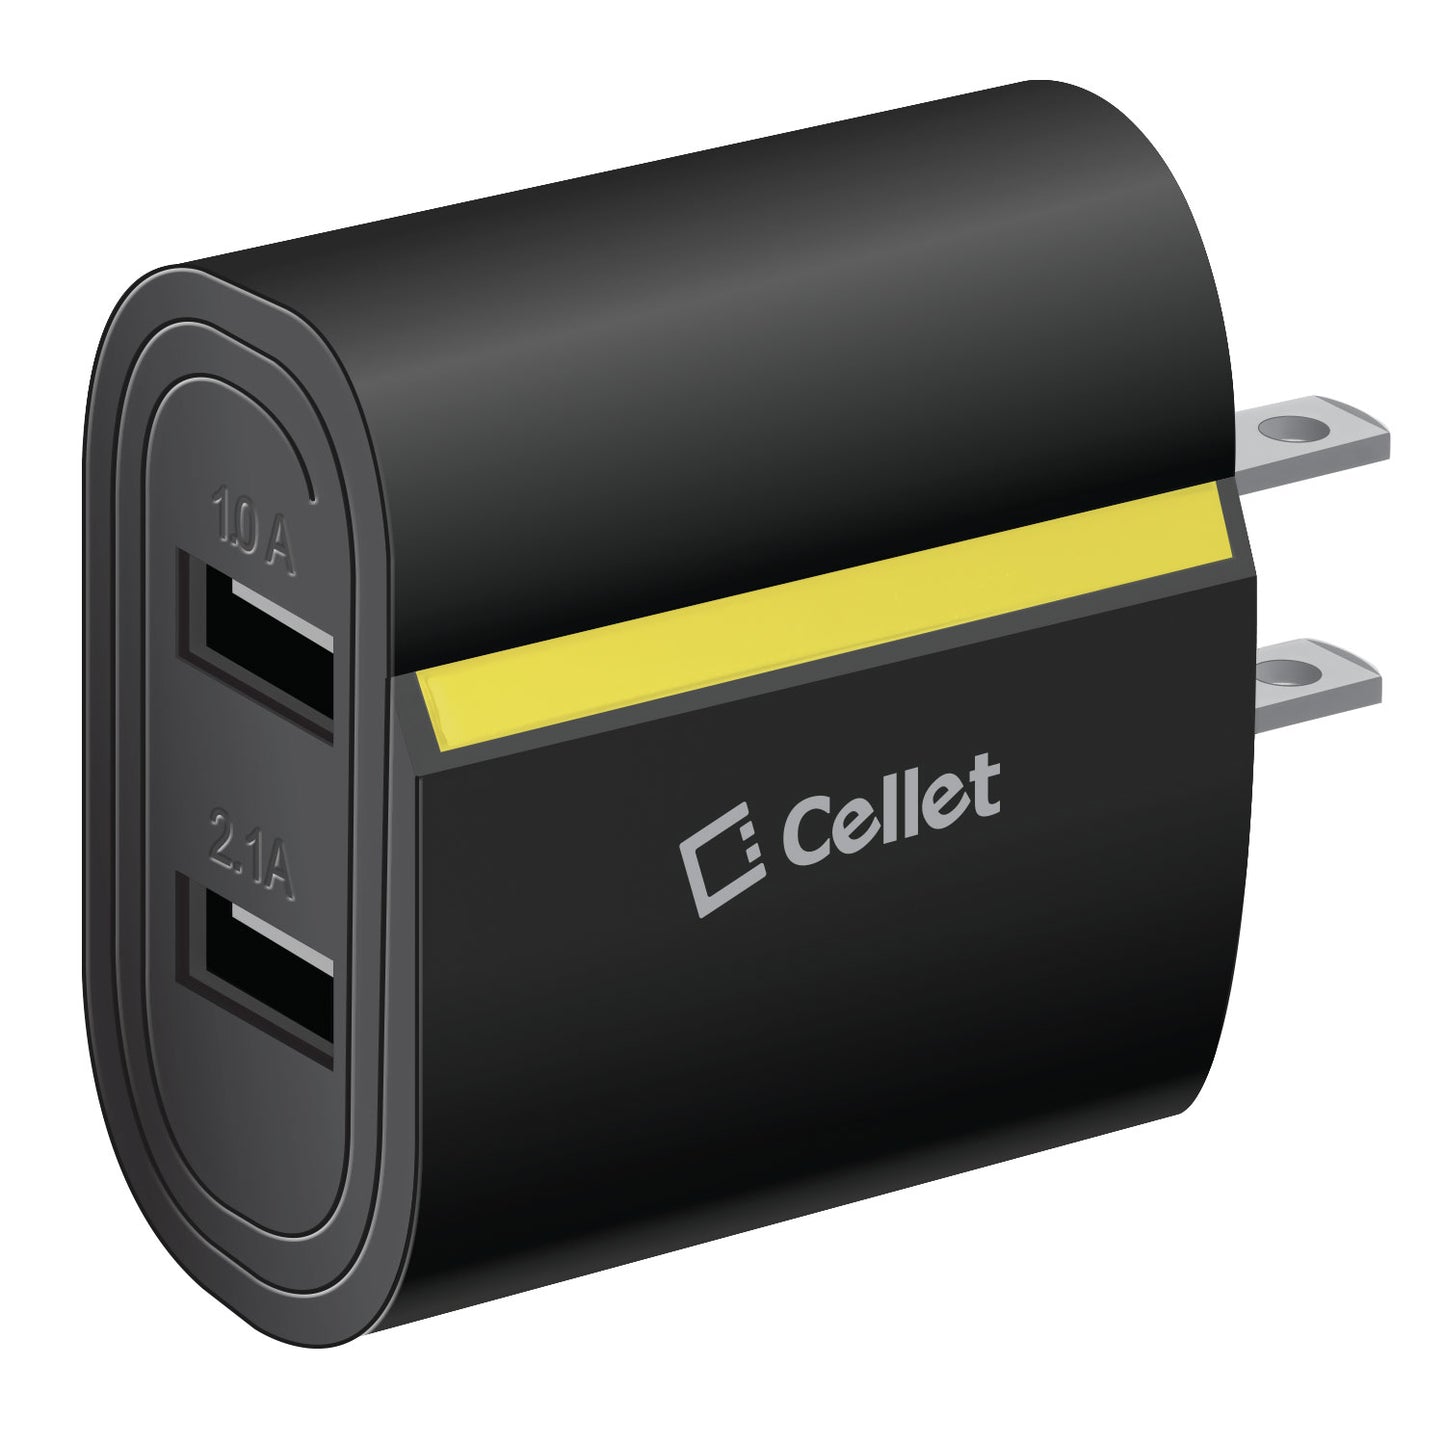 TANN230BK - Cellet Dual USB Home Charger, 2.1 Amp / 10 Watt Wall Charger for Apple iPhone X, iPad Mini, Galaxy Note 8 - Cable Sold Separately